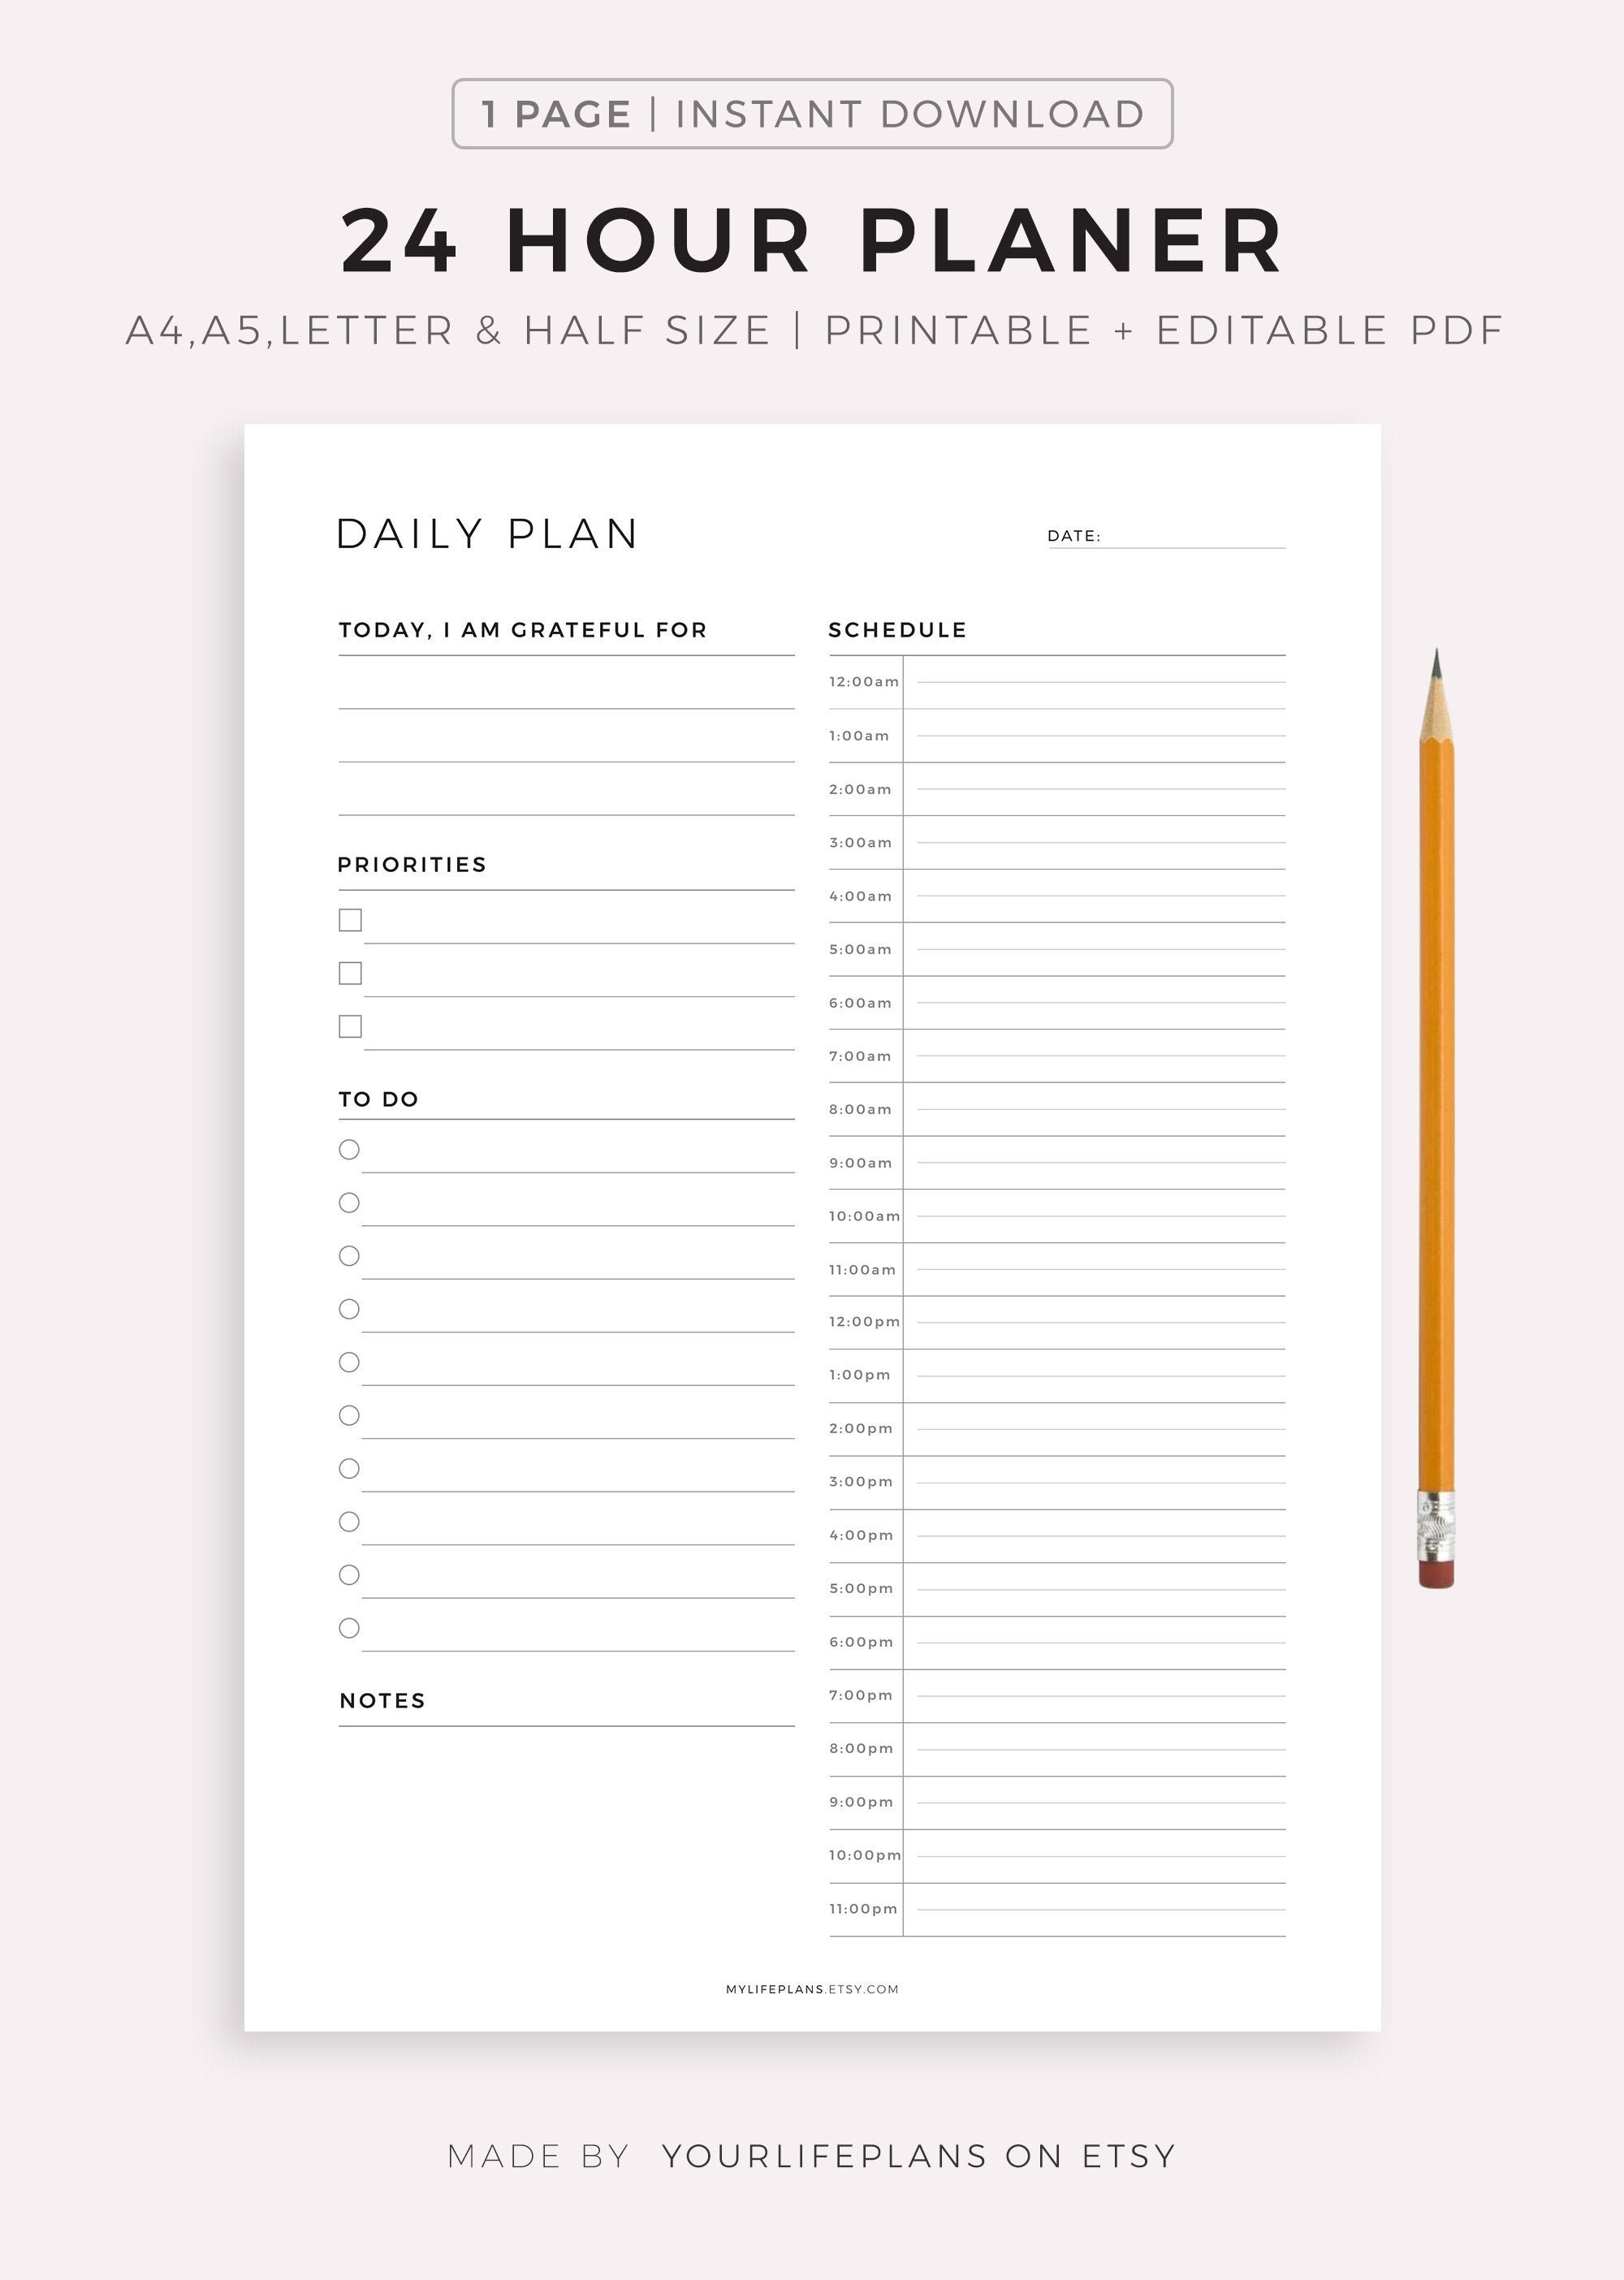 24-hour-daily-planner-printable-daily-to-do-list-for-work-etsy